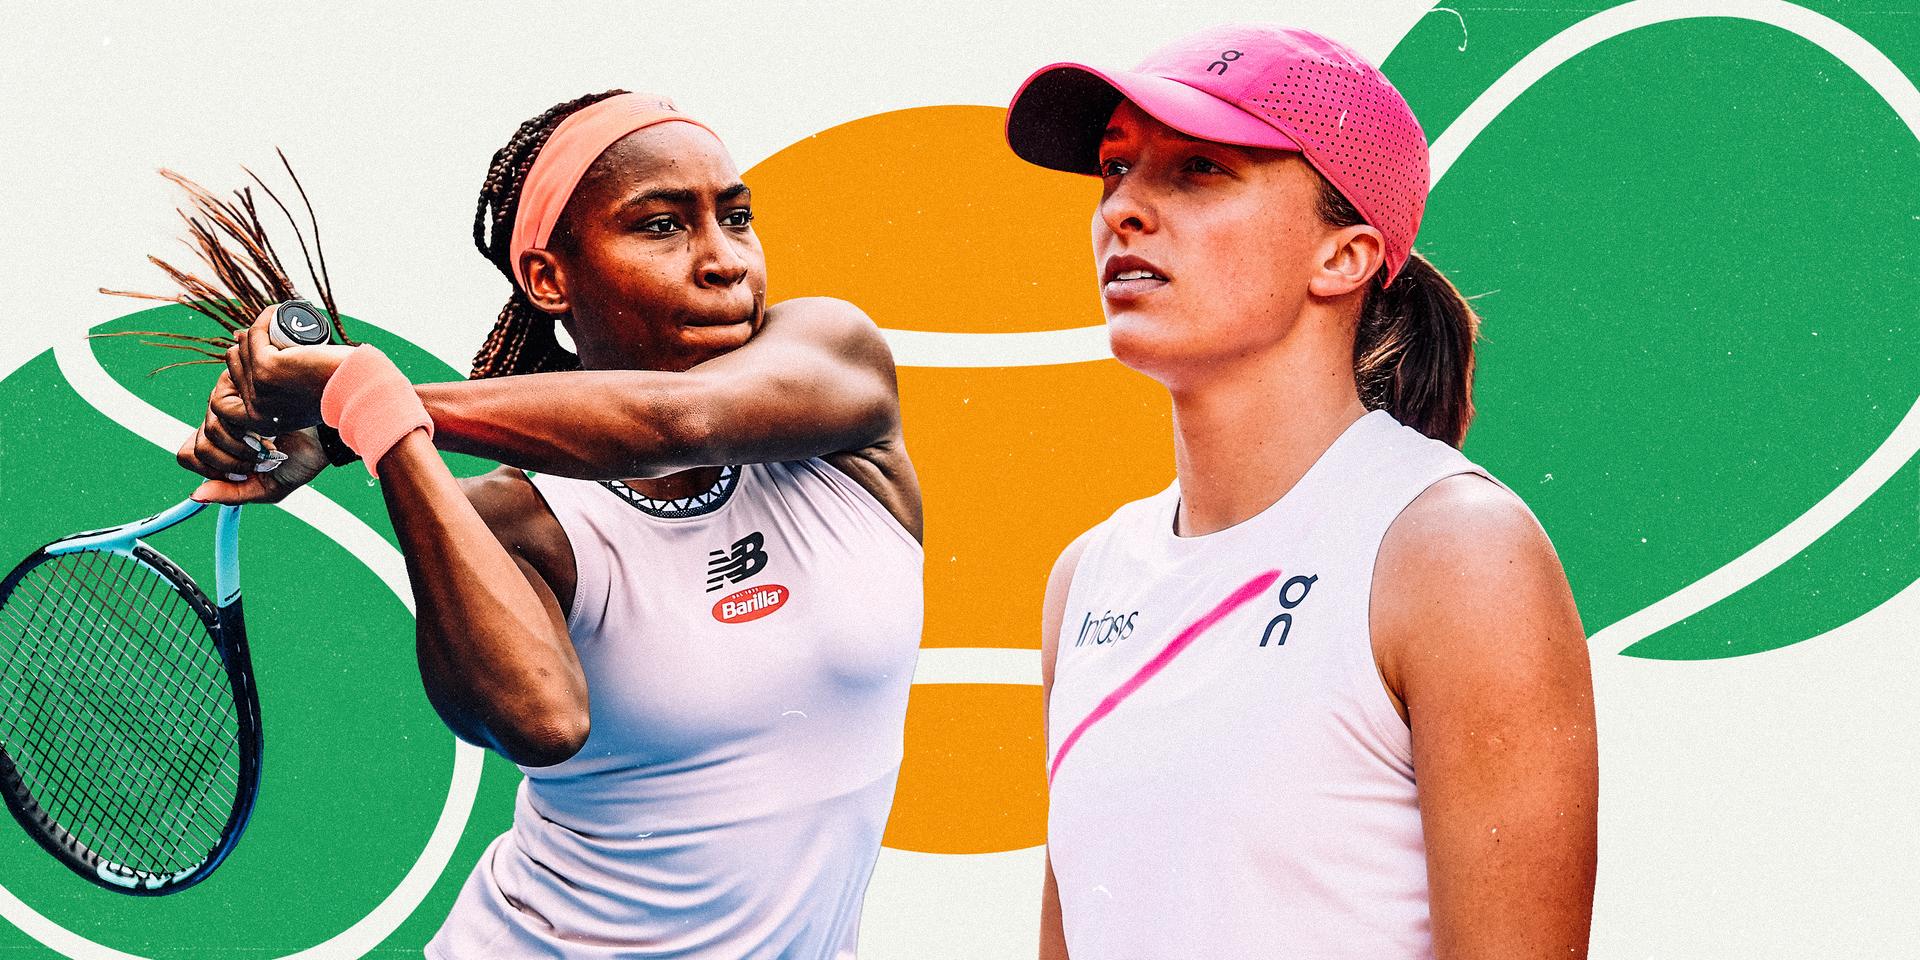 'I think we deserve better': How and why tennis lets women down